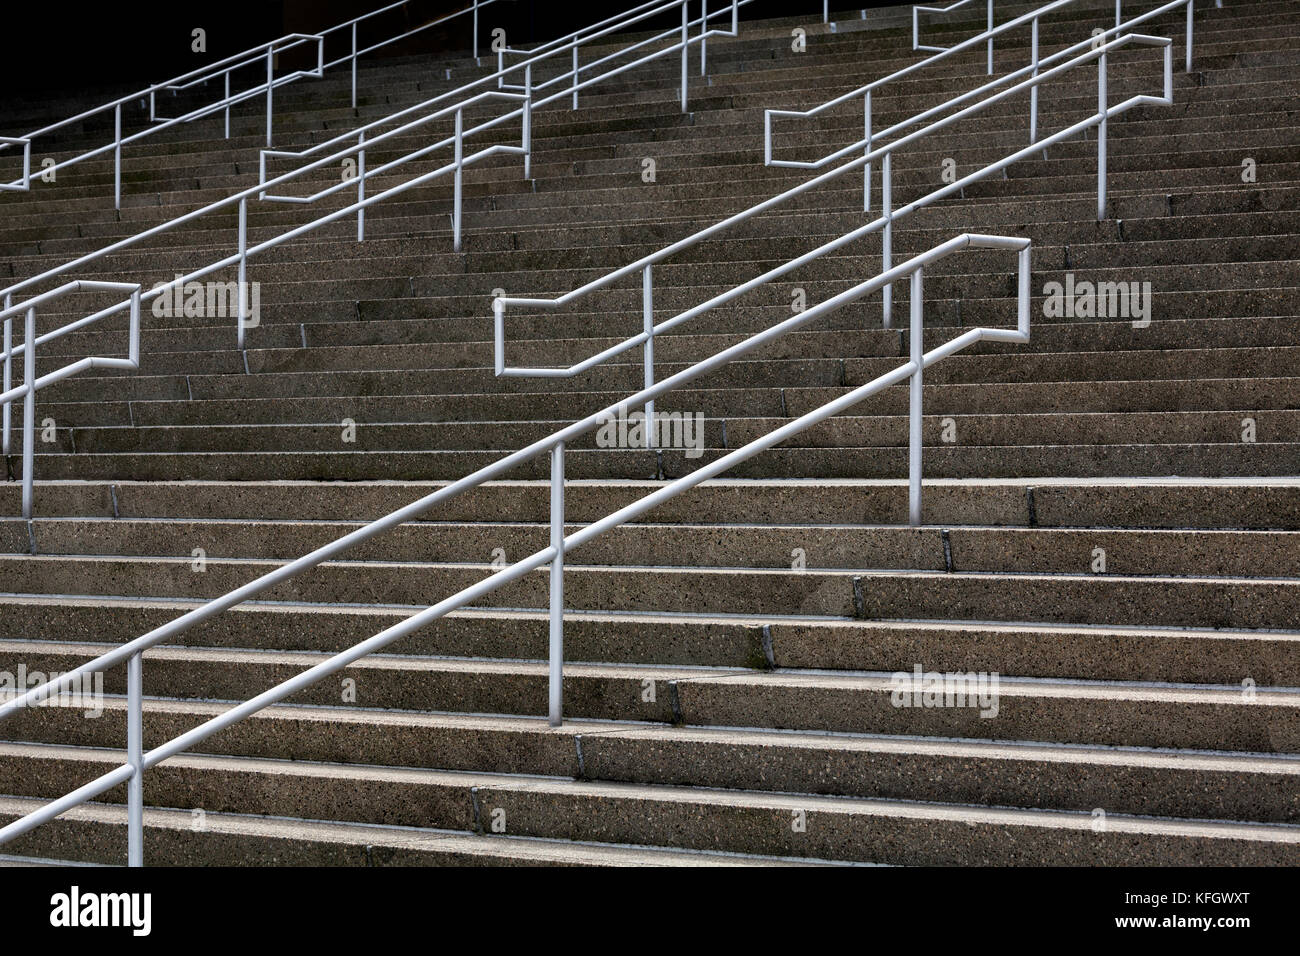 WA14036-00...WASHINGTON - Steps and railings at Century Link Field in Seattle, part of the stadium distric. Stock Photo